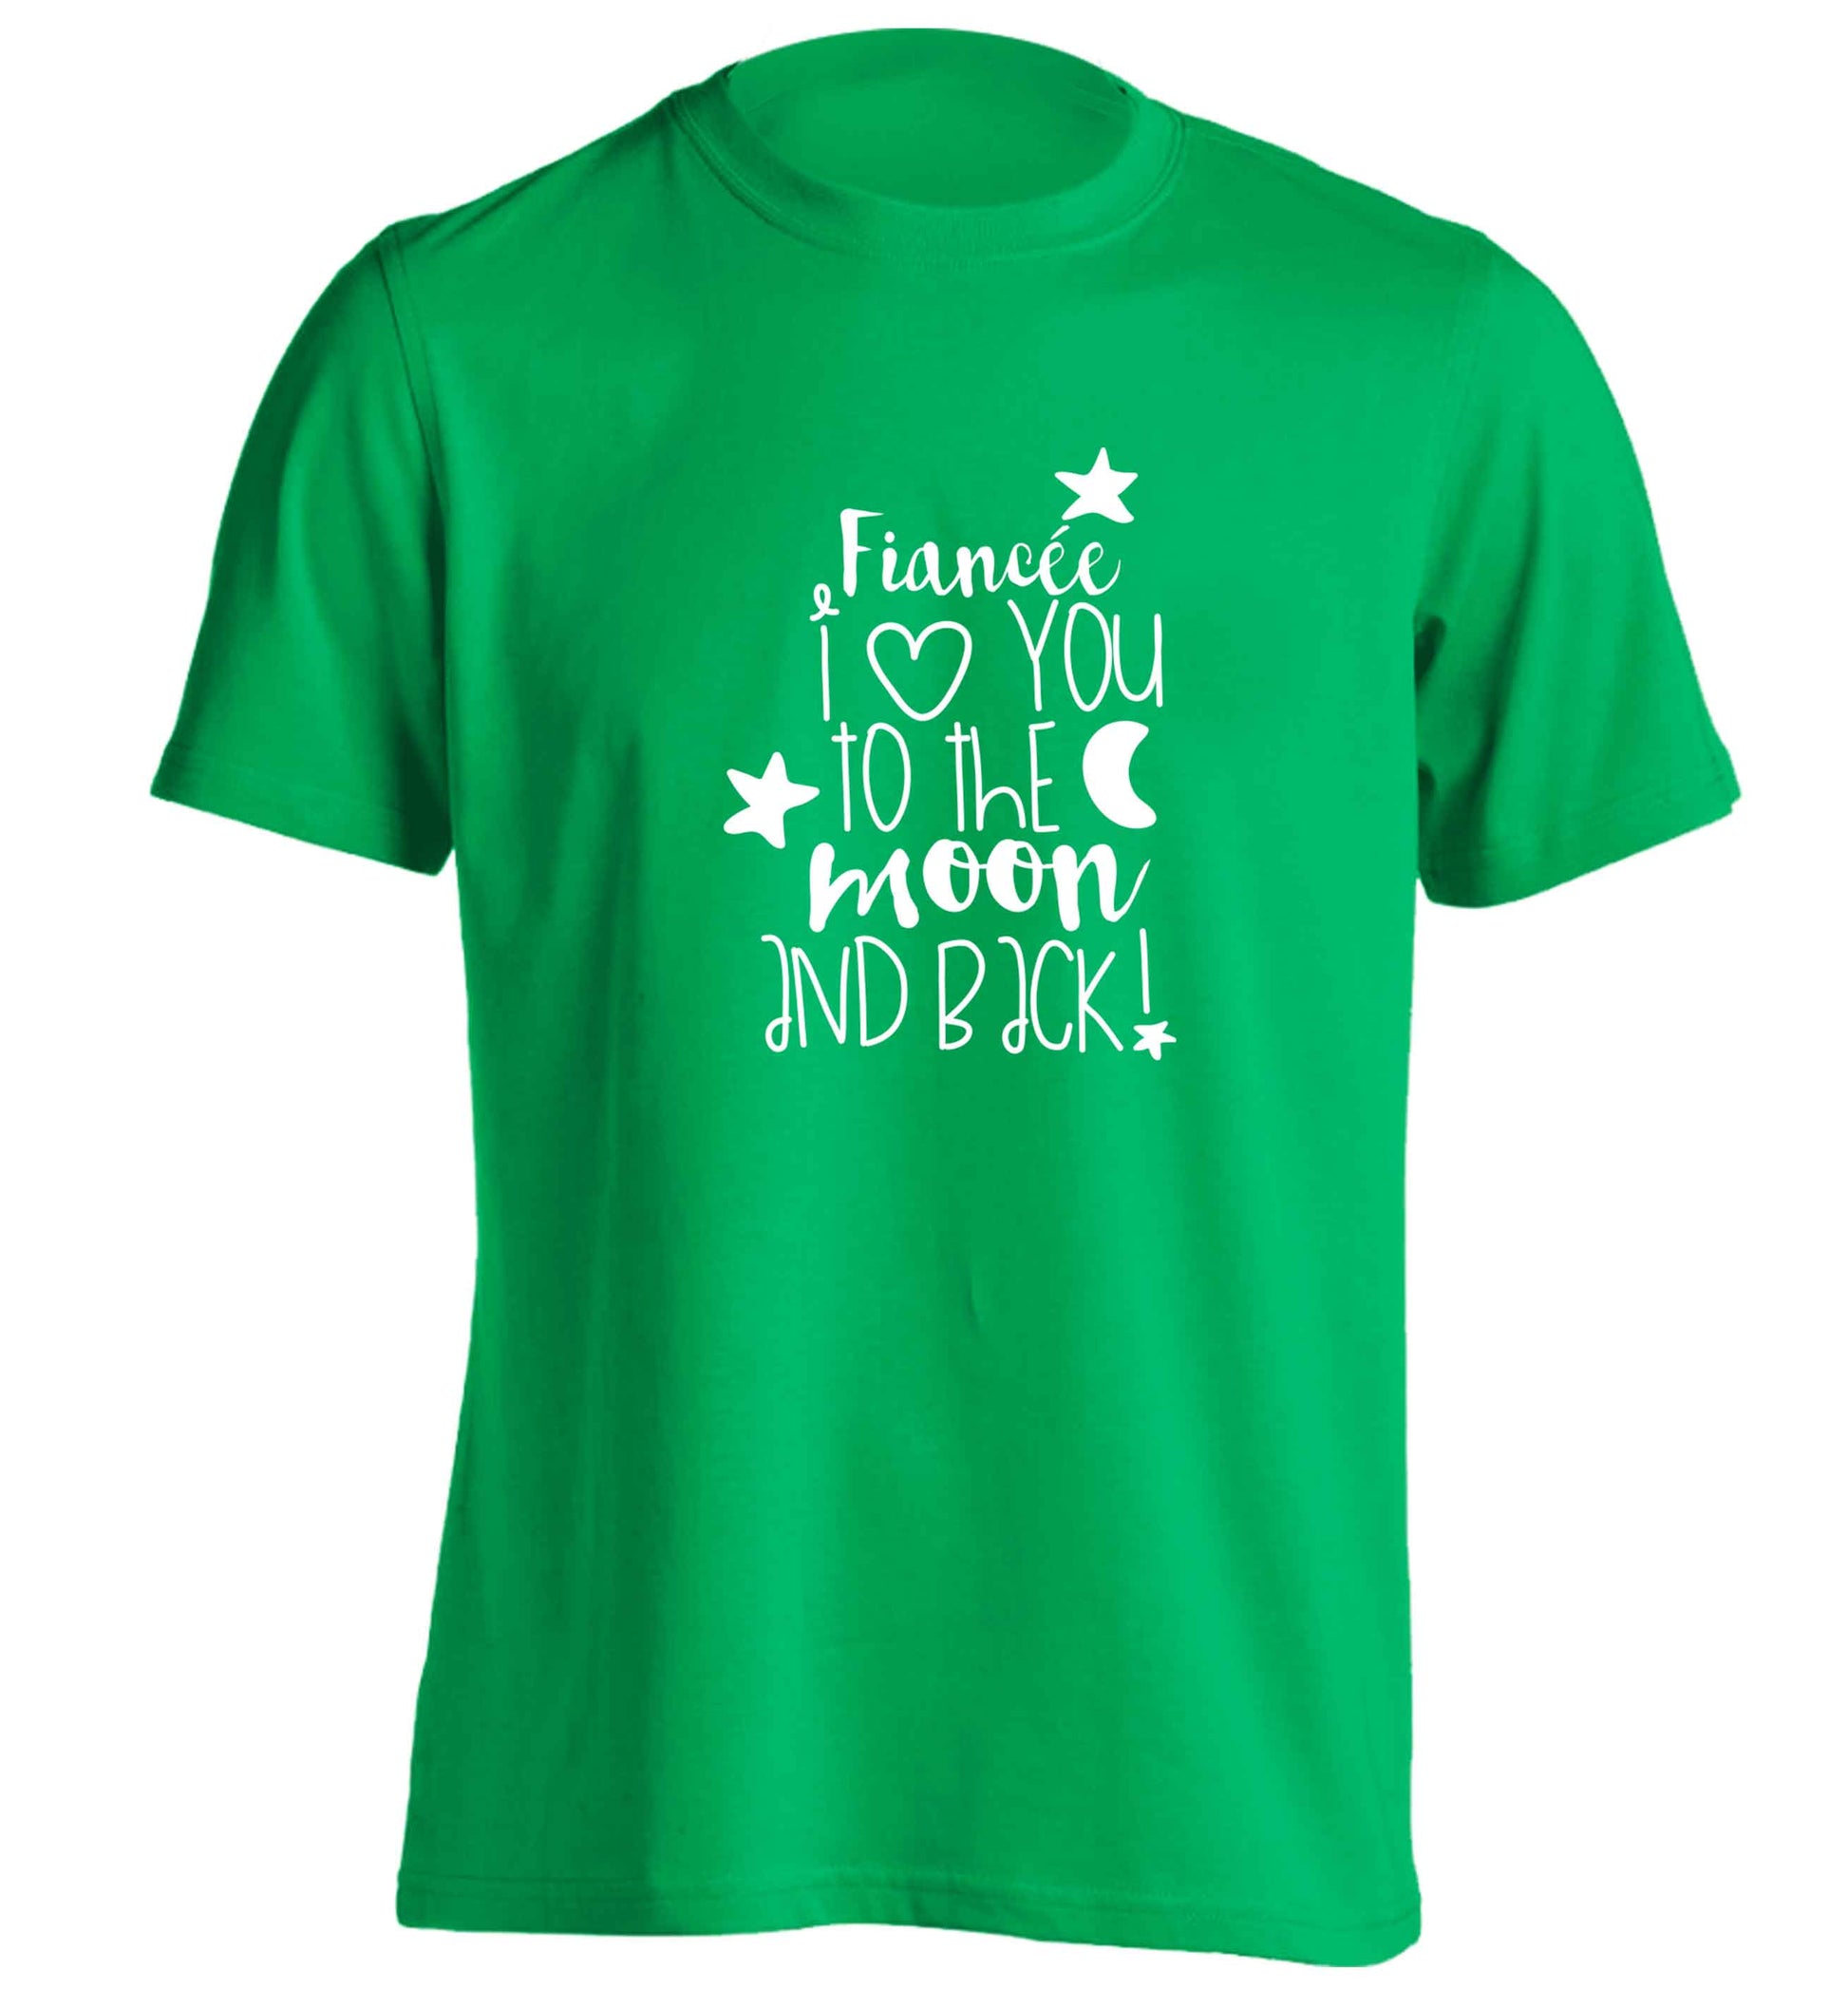 Fianc√©e I love you to the moon and back adults unisex green Tshirt 2XL